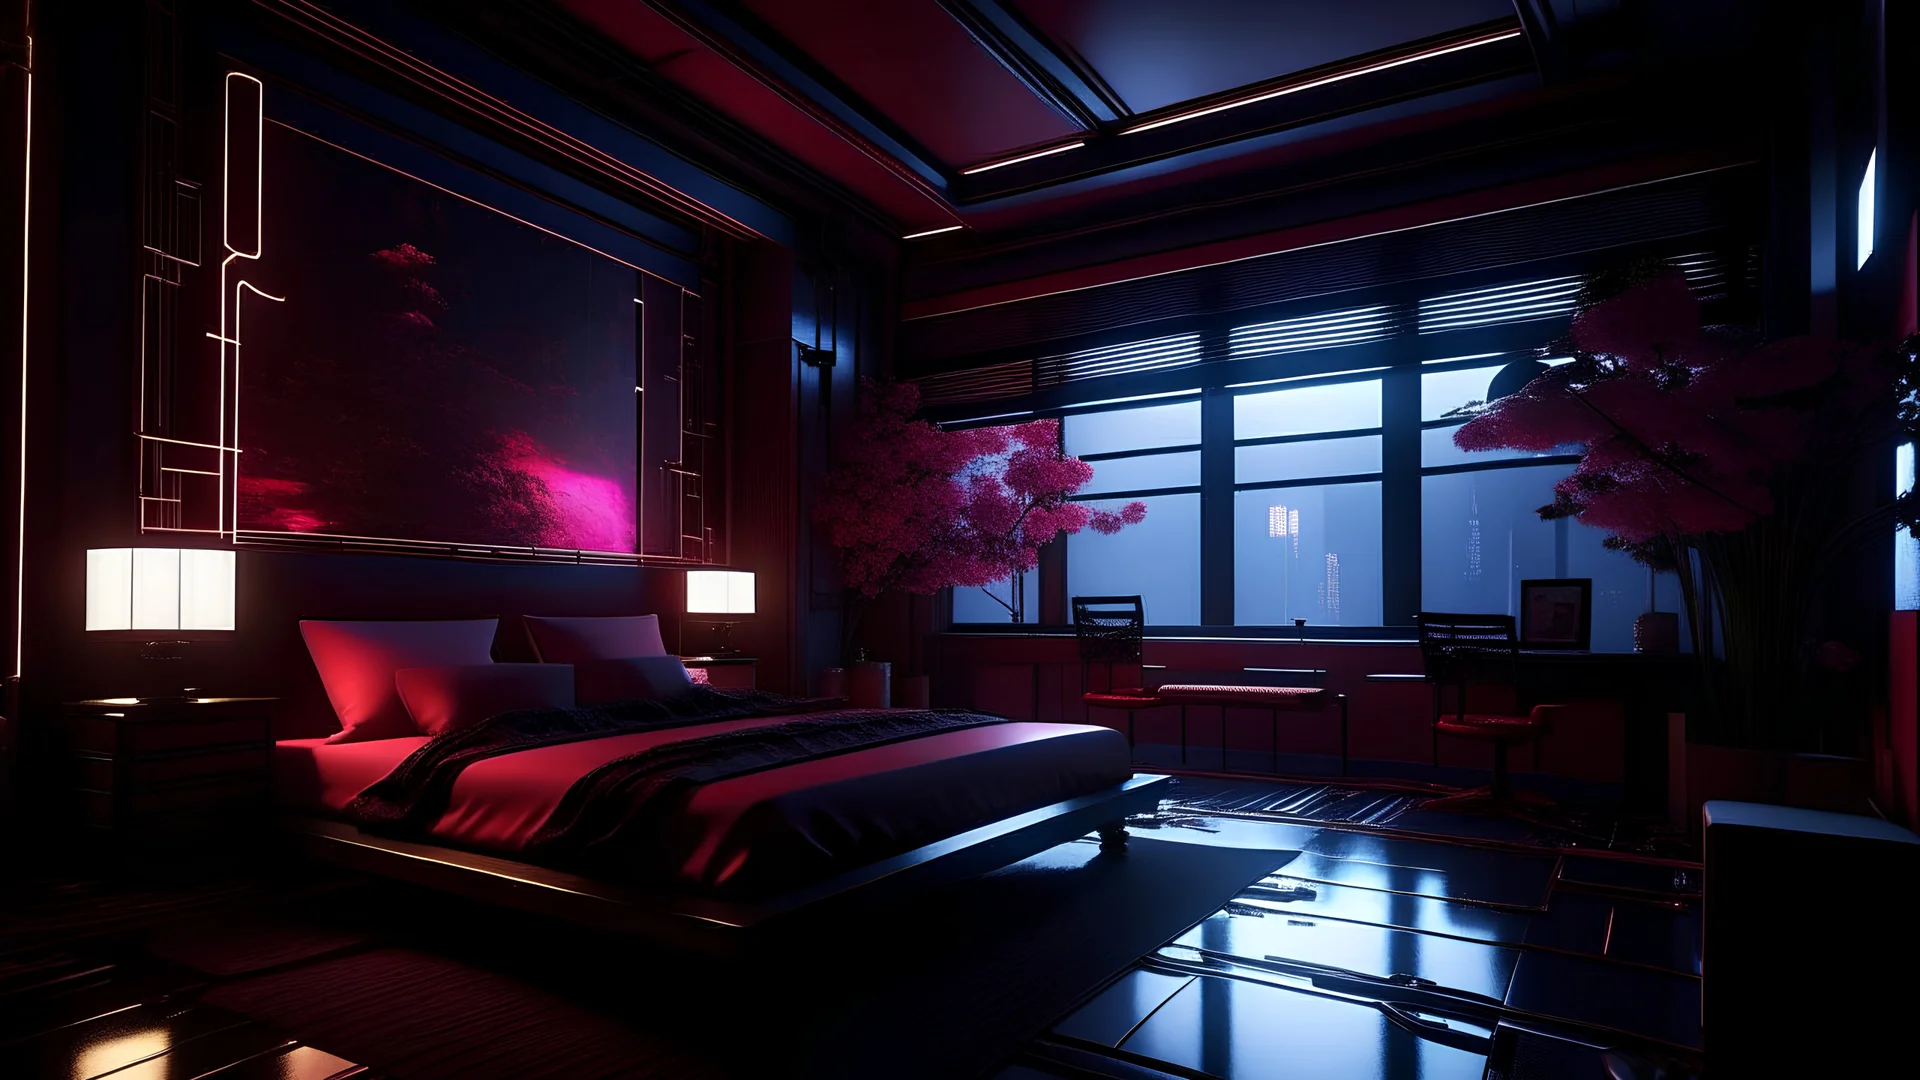 Cyberpunk luxury huge bedroom. Detailed. Rendered in Unity. Japanese elements. Black and red lighting. vivid purple light, Holograms. add a sakura tree into the room. Add a japanese katana in the wall and a gaming pc, samurai armor, cyberpunk big city, huge window, night, red curtain